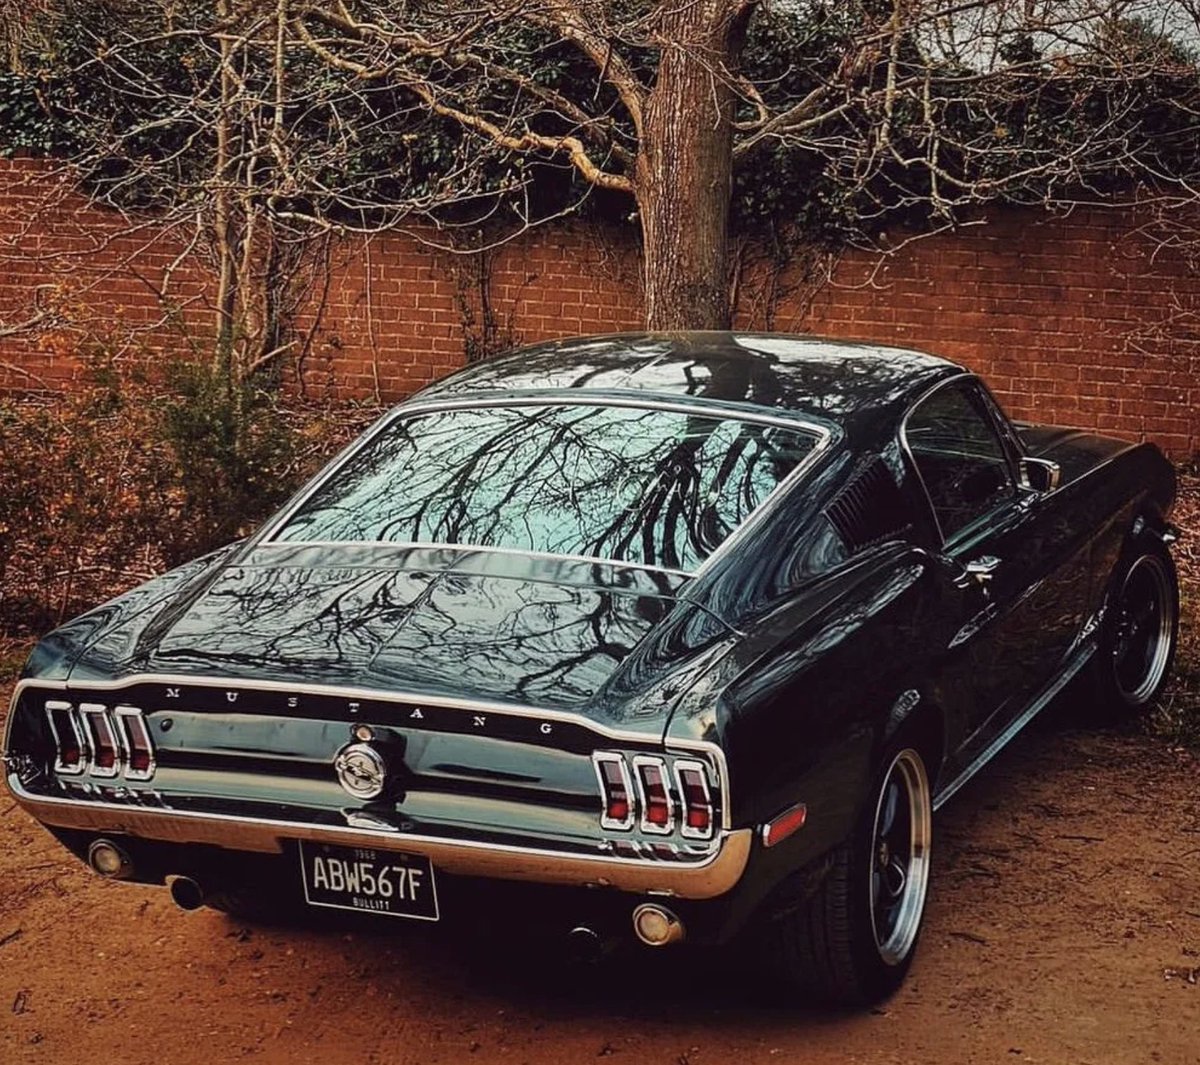 Check out this first gen moss green #fastback owned by @cwdutoit #classicmustang #mustangsofinstagram #mustangpodcast #americanmuscle #driveclassics #musclecar  